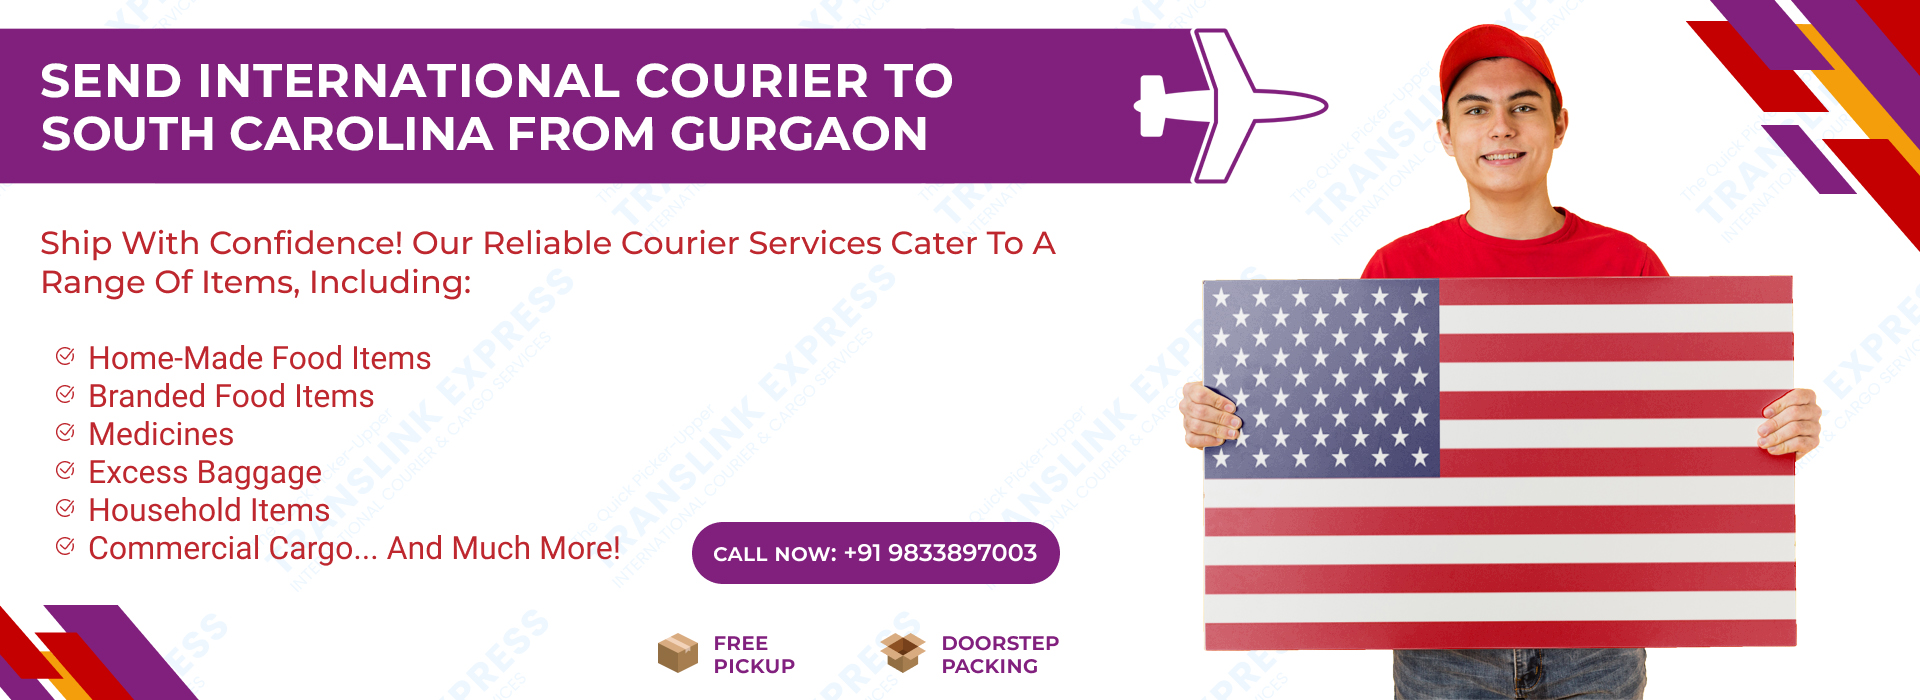 Courier to South Carolina From Gurgaon